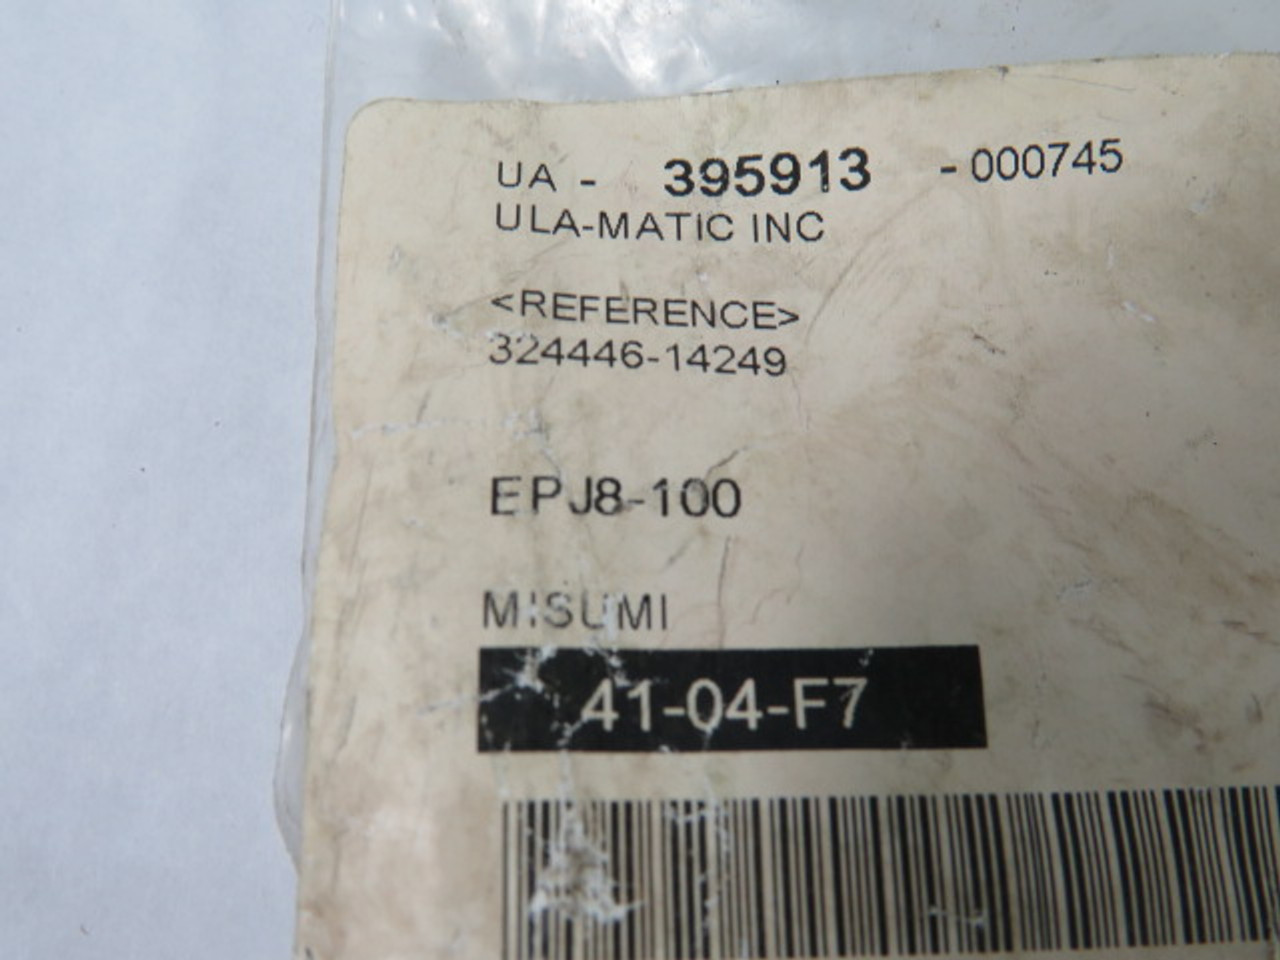 Misumi EPJ8-100 Straight Ejector Pins Shaft Dia: 8mm Lot of 4 ! NWB !